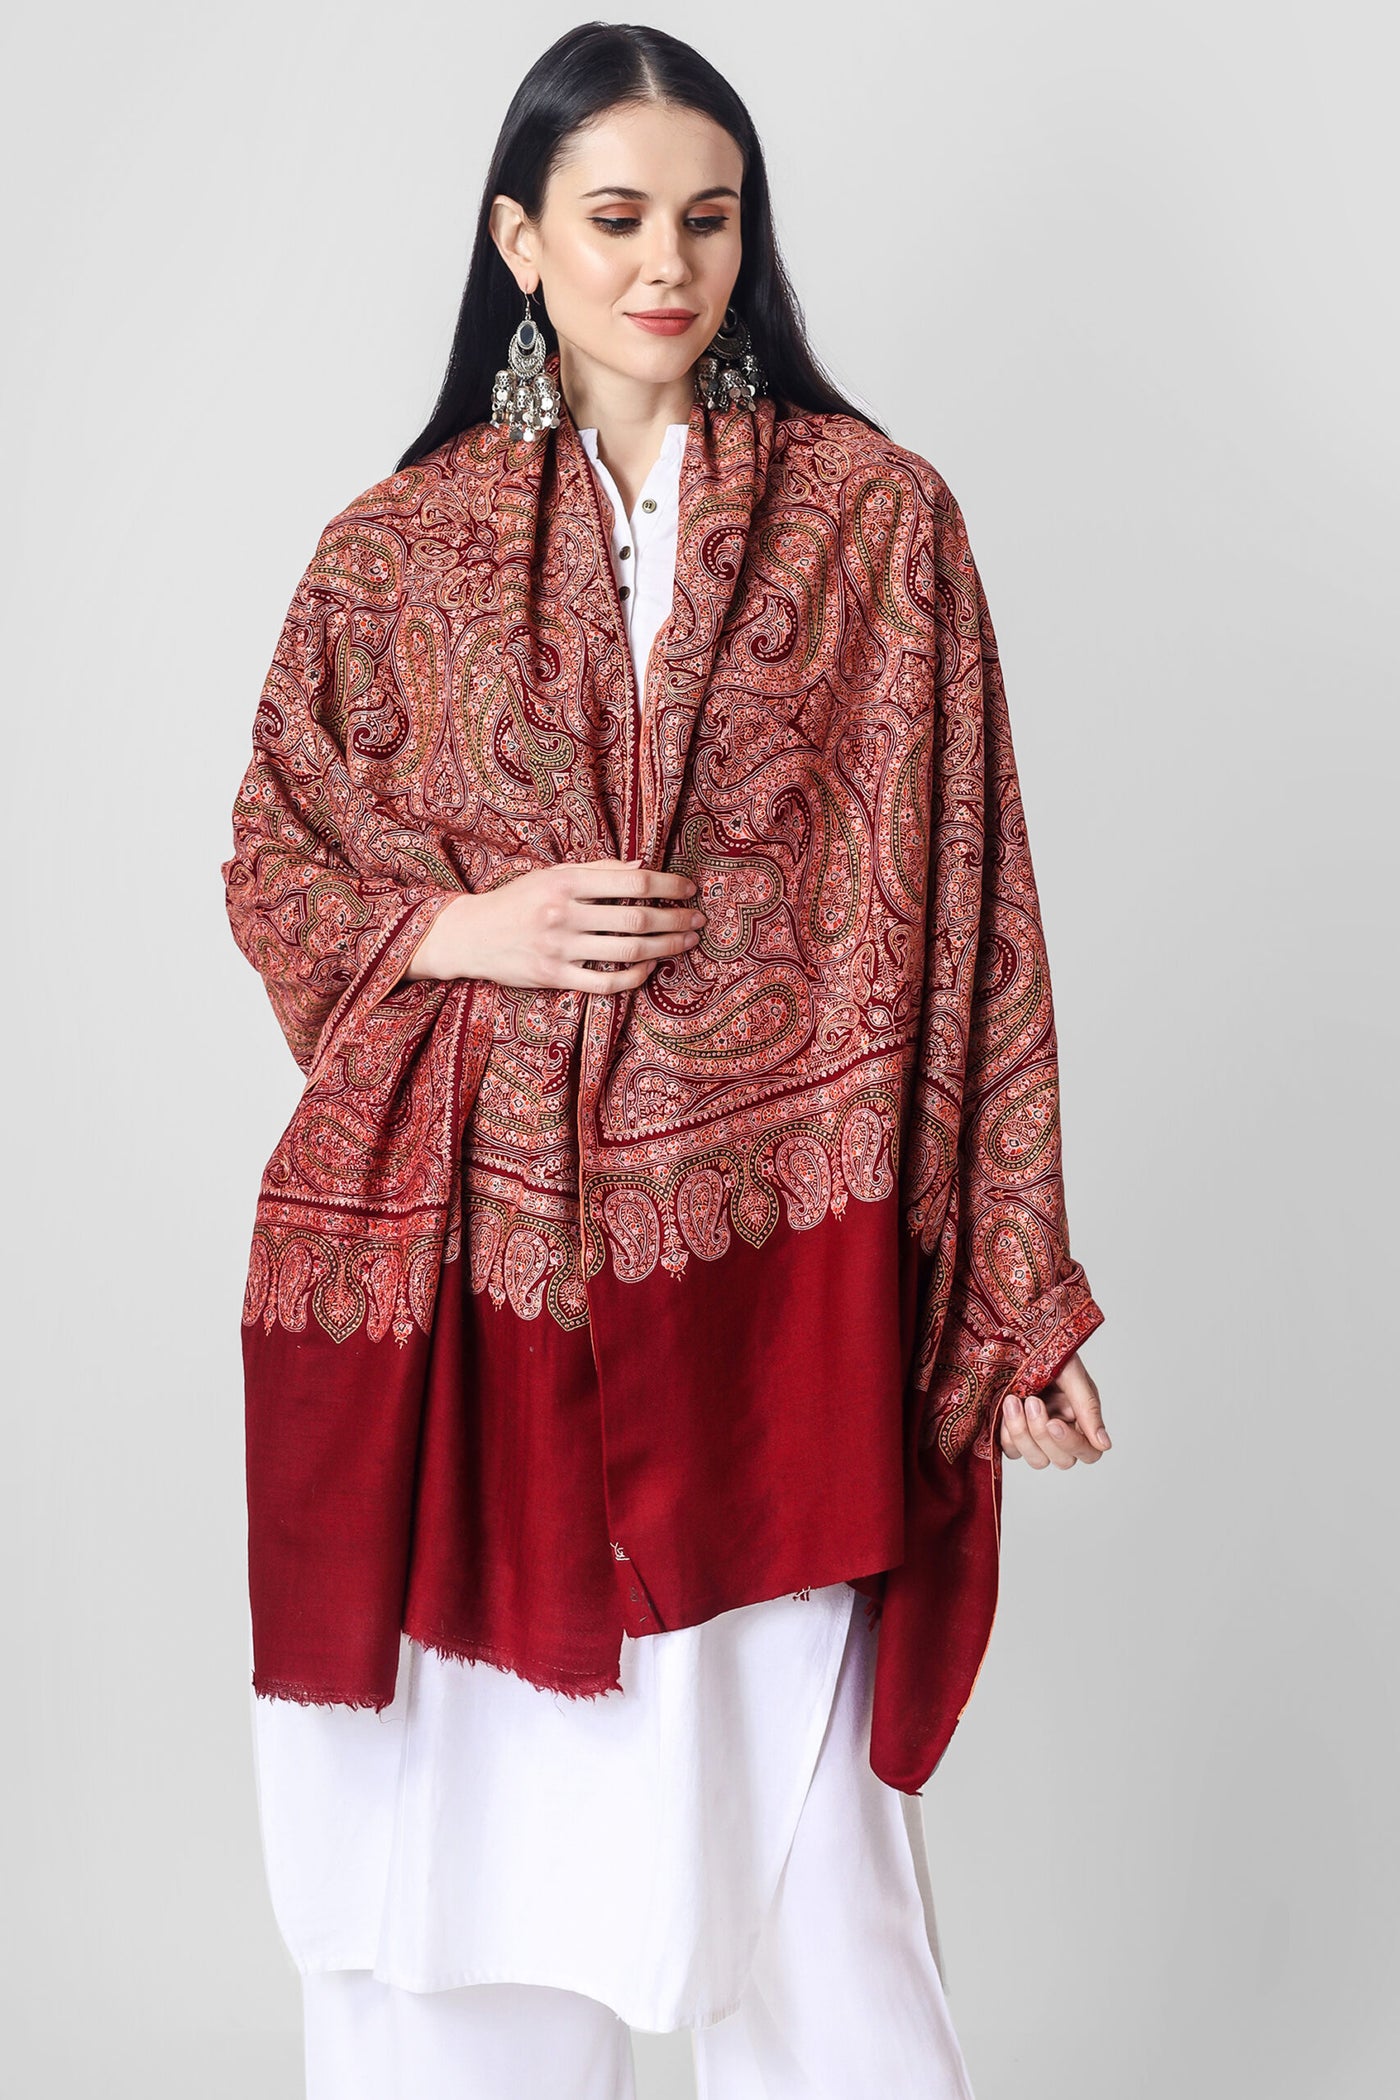 The Maroon Sozni Needlework Jama Pashmina shawl is a luxurious and elegant accessory that showcases the beautiful hand-embroidery tradition of the Kashmir region of India. 